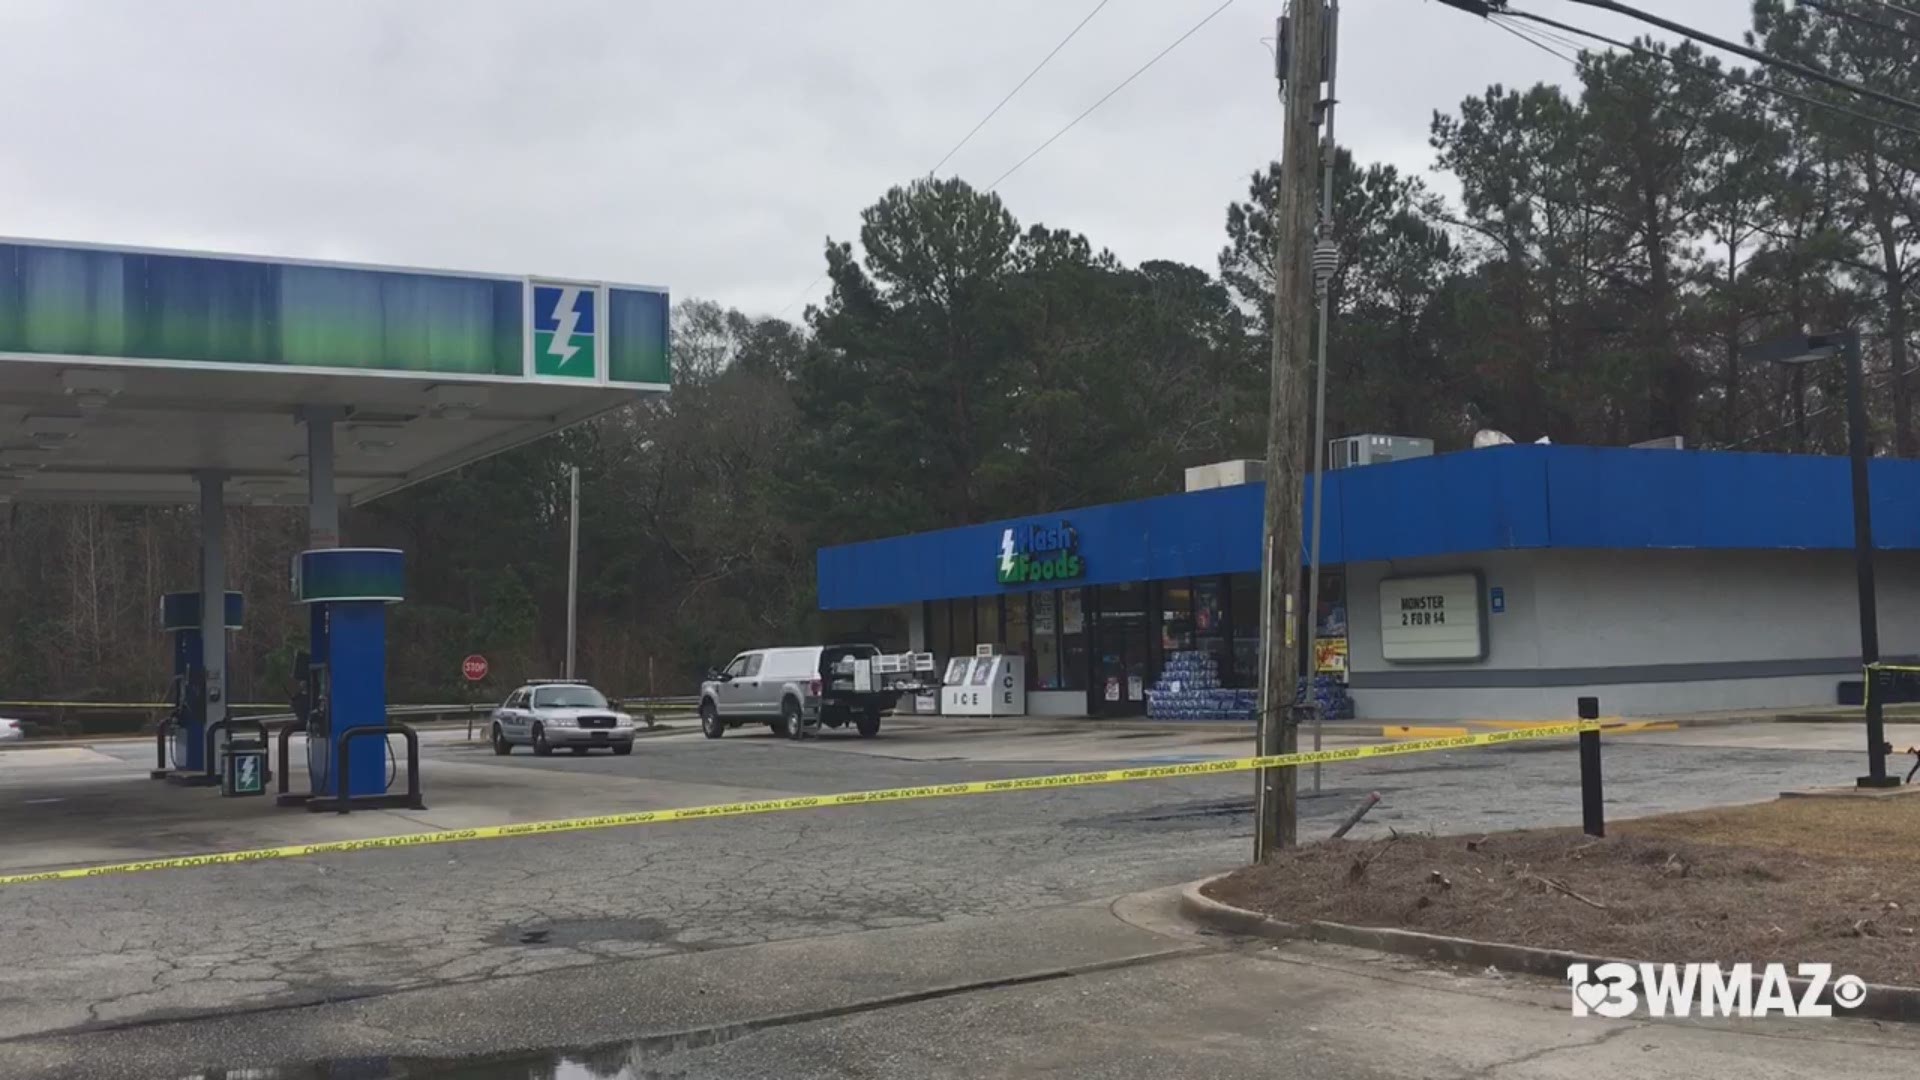 Warner Robins Police are investigating a robbery at the Flash Foods on Watson and Corder Rd